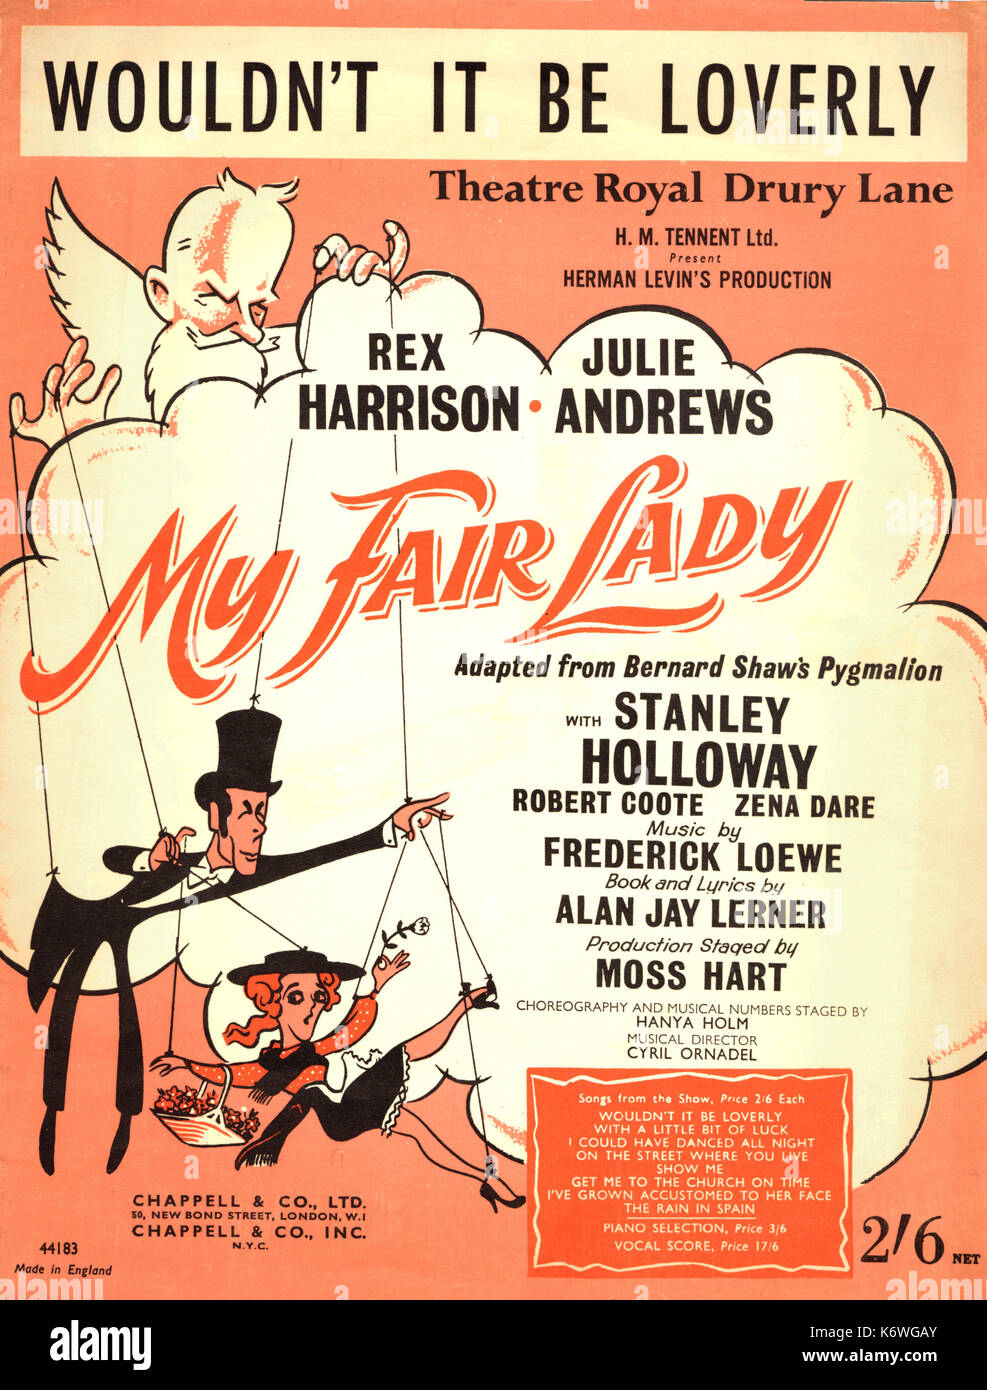 LOEWE, Frederick - MY FAIR LADY llustrated score cover of 'Wouldn't it be Loverly' from the musical, 'My Fair Lady'.  Published by Chappell.  Music by Loewe; Lyrics by Alan J Lerner. GB Shaw (author) as God playing with man and woman as puppets on a string. Based on GB Shaw 's Pygmalion - upper class person transforms working class girl into society lady. Stock Photo